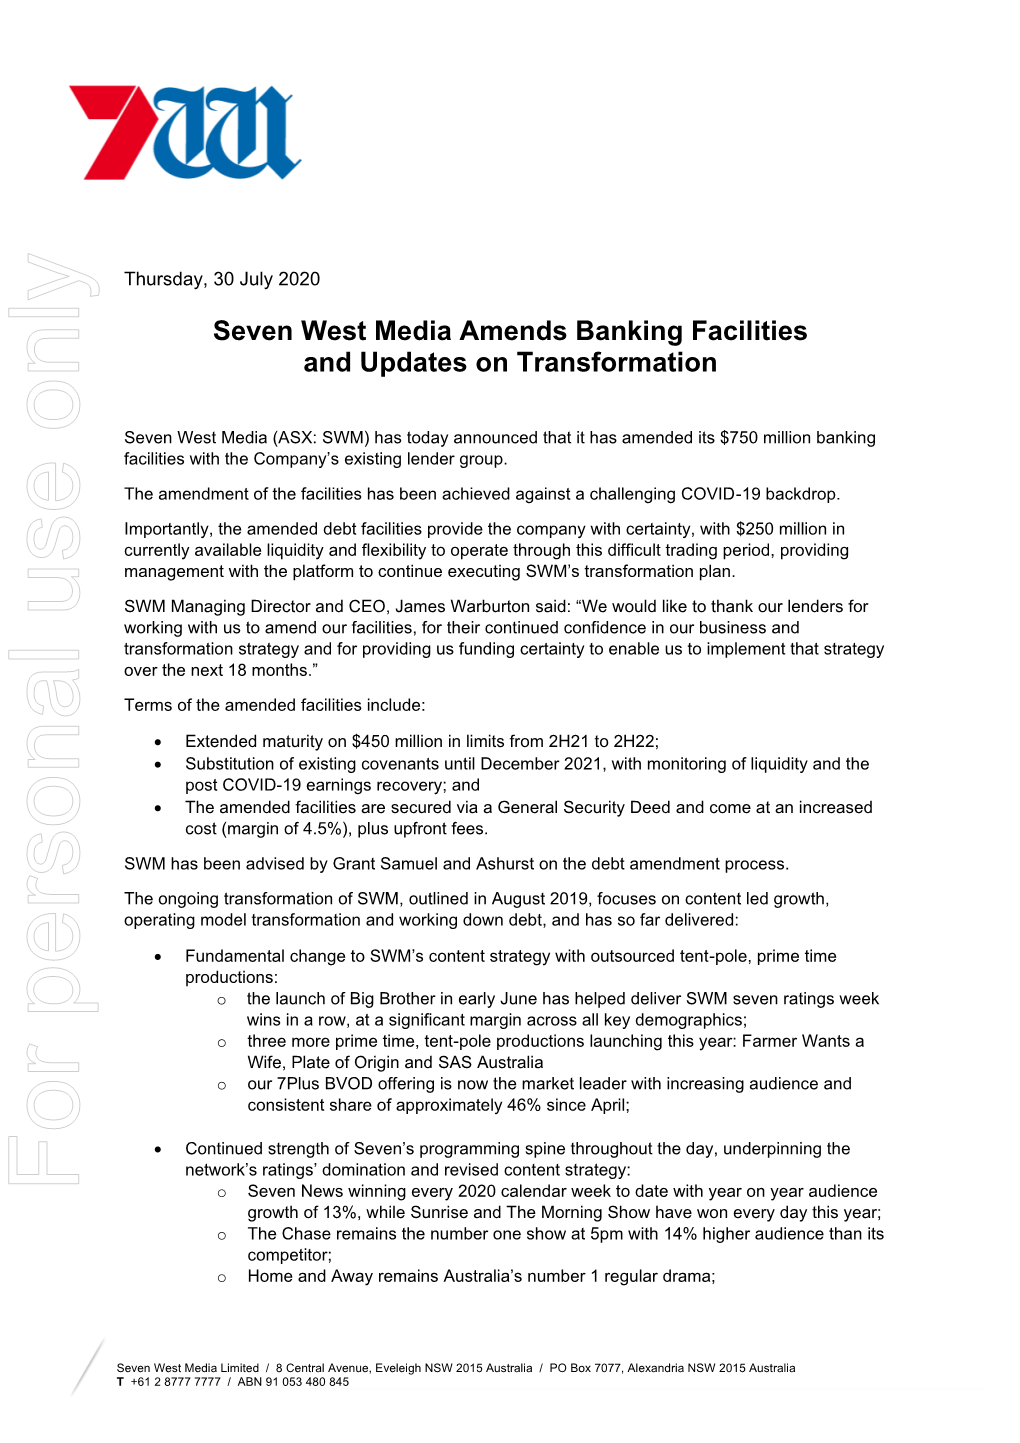 Seven West Media Amends Banking Facilities and Updates on Transformation